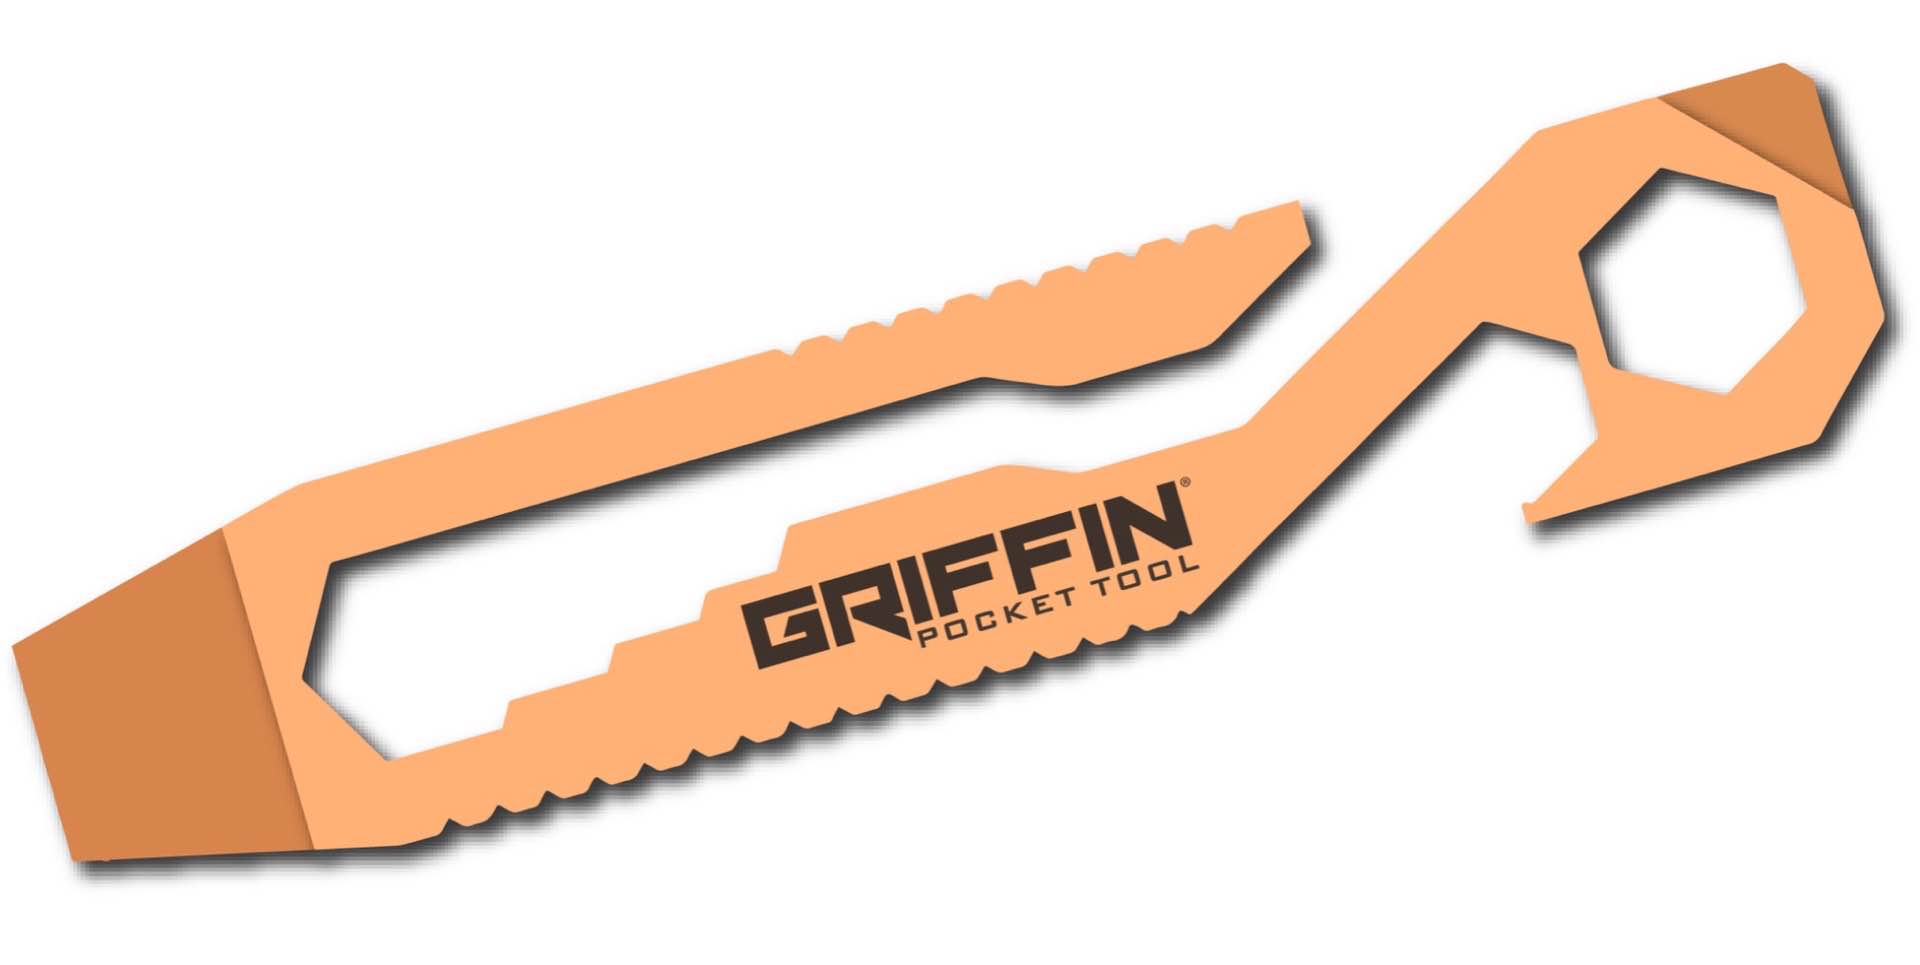 griffin-pocket-tool